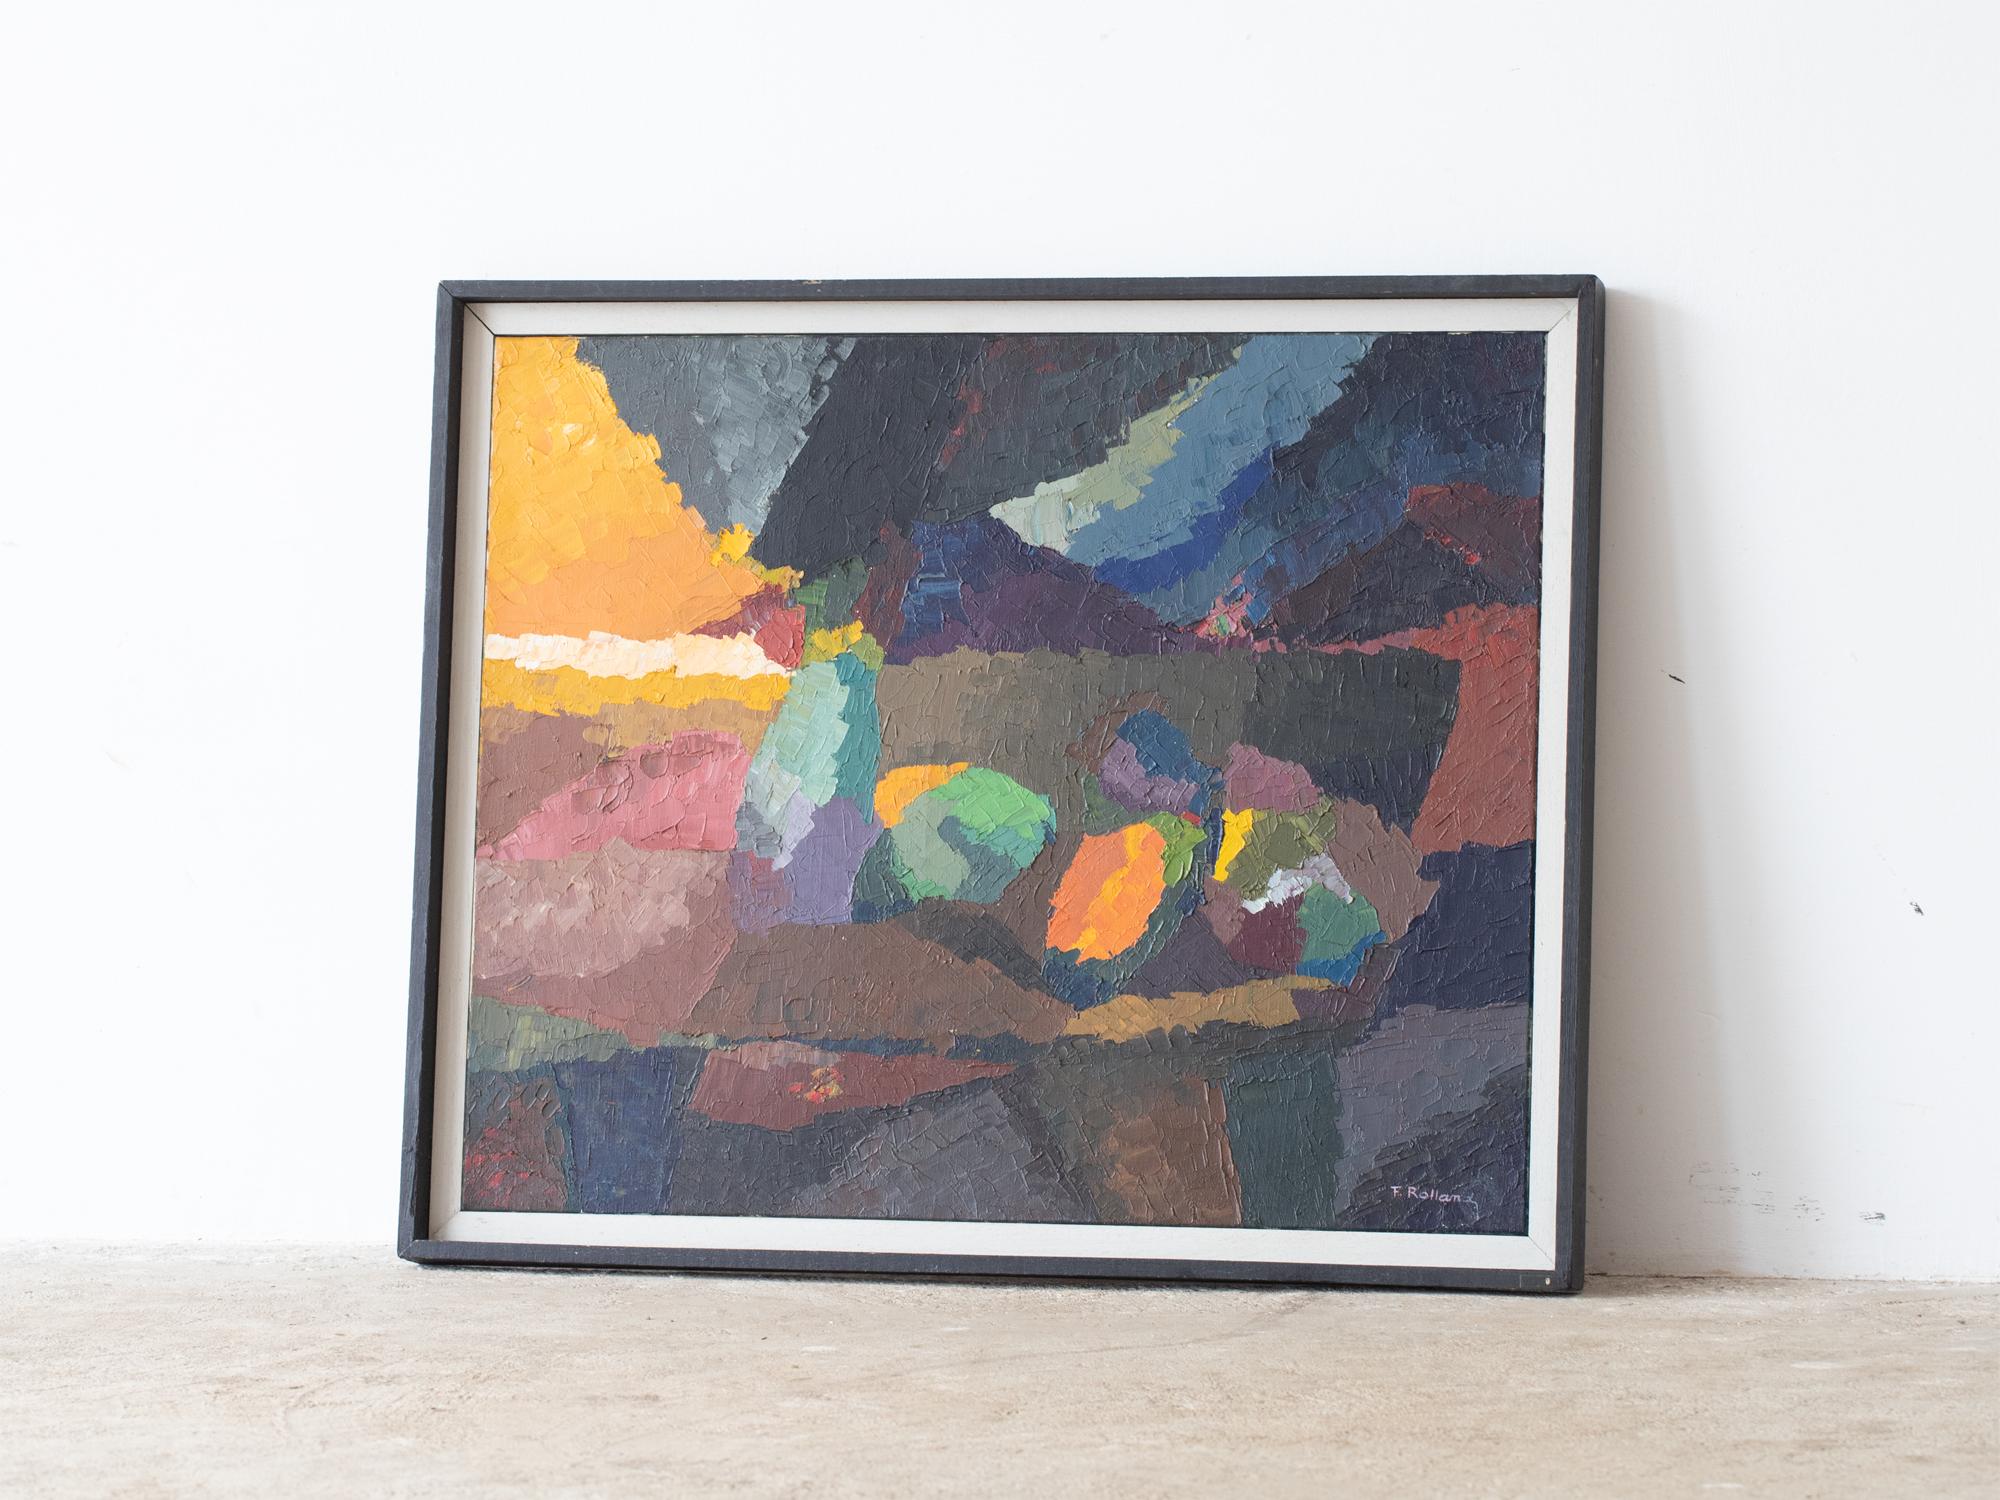 An impasto acrylic on canvas painting of a mountainous landscape. Signed T. Rolland, French, mid-late 20C.

Stock ref. #2373

In good order with light wear, set in a black timber frame.

56 x 67 cm

22.0 x 26.4 